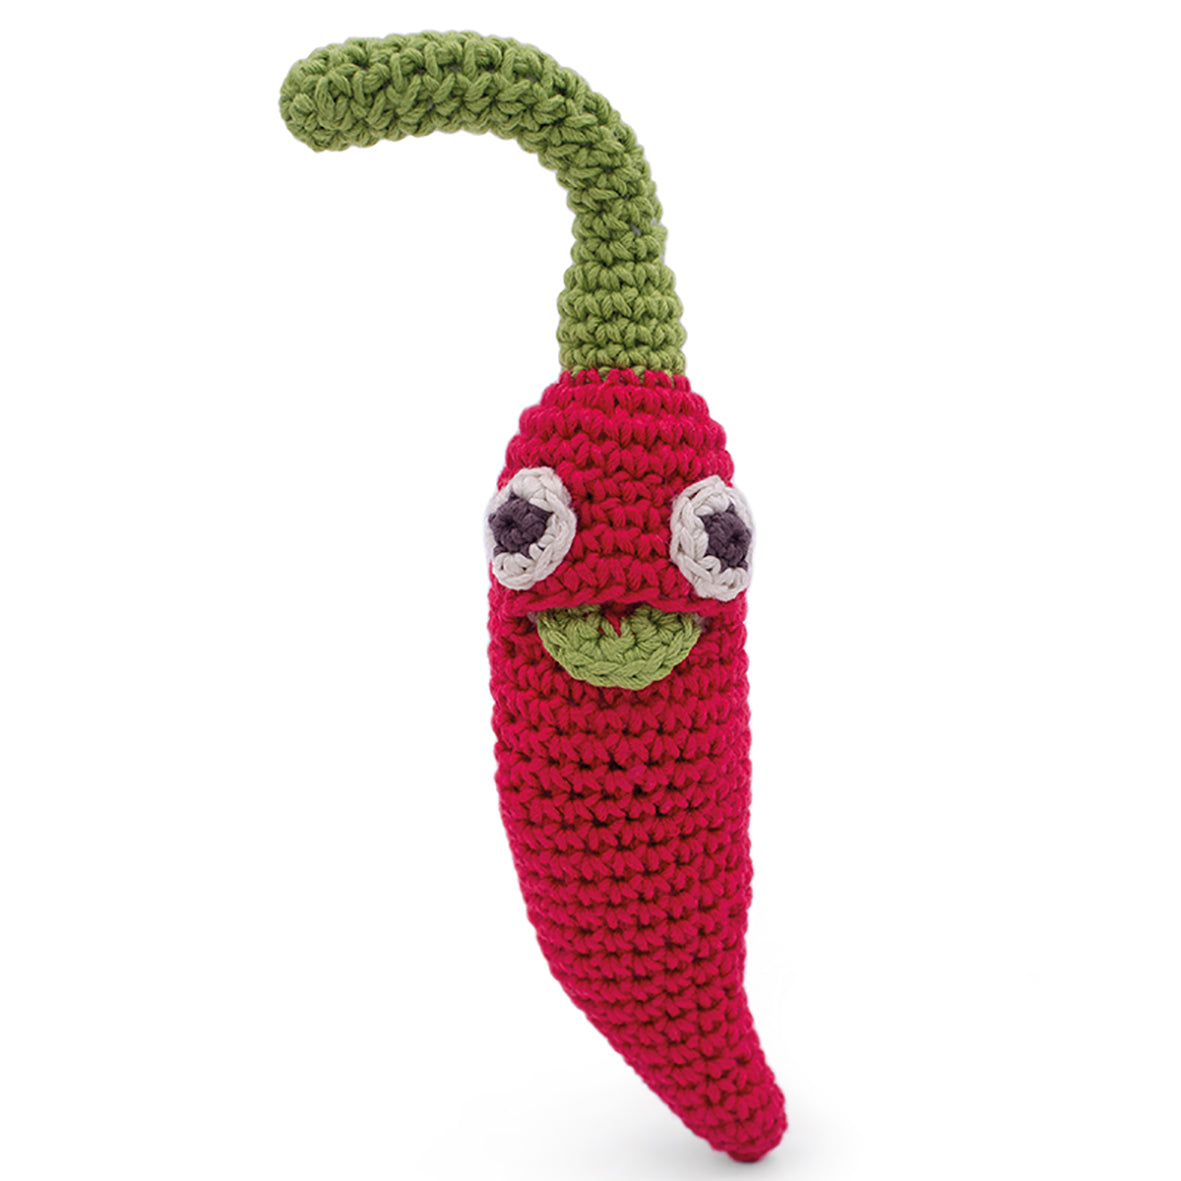 Willy Chili Pepper - Rattle - Myum - The Veggy Toys